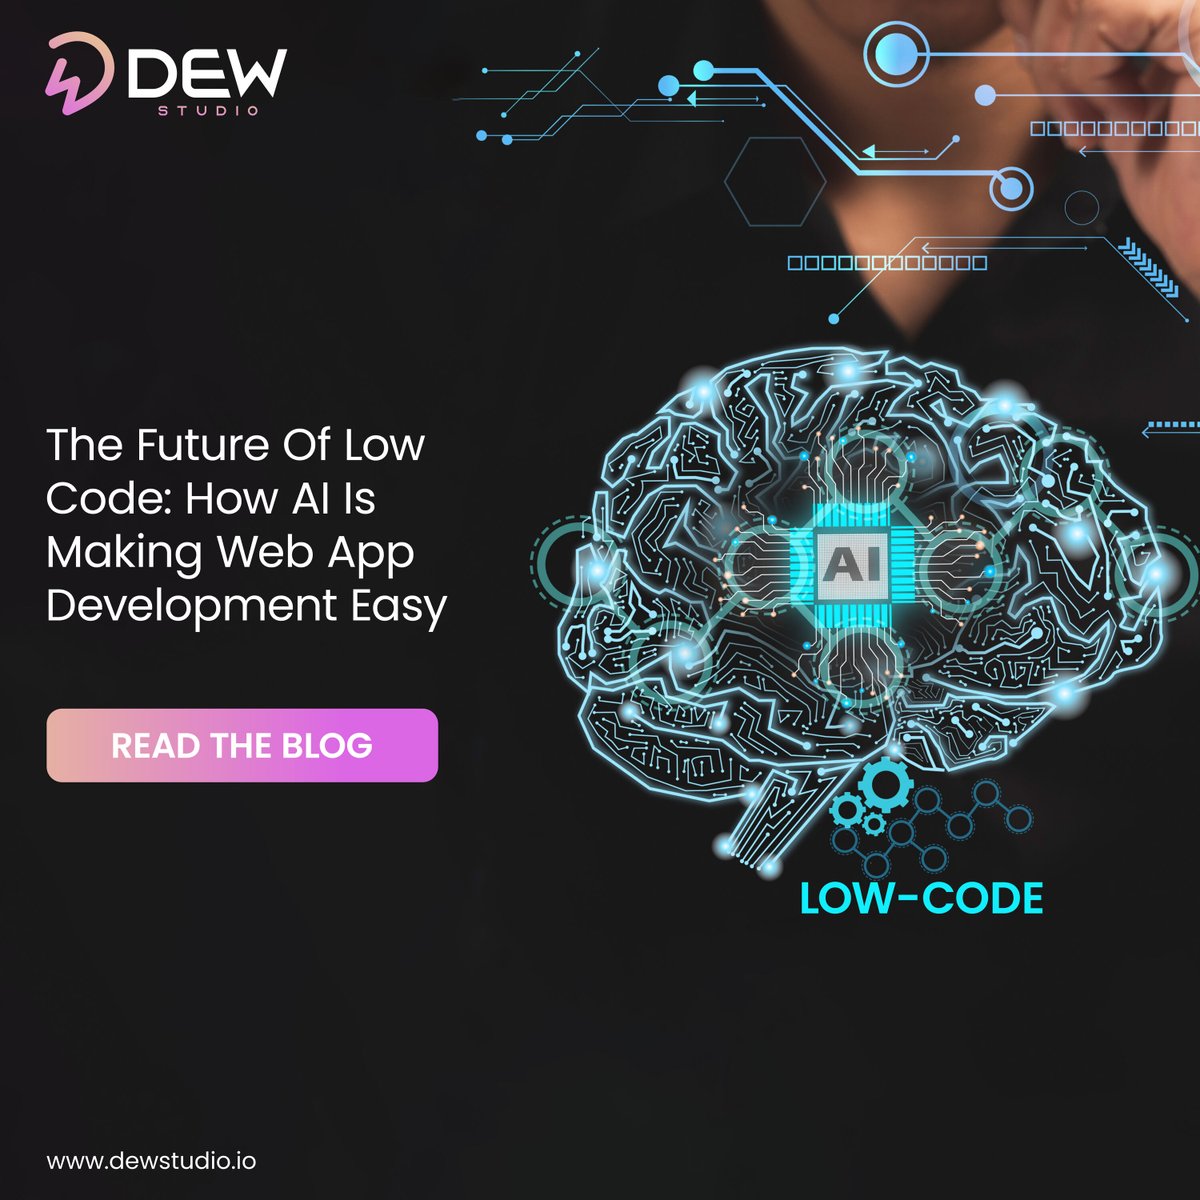 Know how #artificalintelligence is making space in the IT industry. 
bit.ly/44OOEo5
Read words from experts on #AI advanced #lowcodeplatform developing #webapplication

#lowcode #lowcodetool #mobileapps #dewstudio #lowcodedevelopment #lowcodedevelopmentplatform